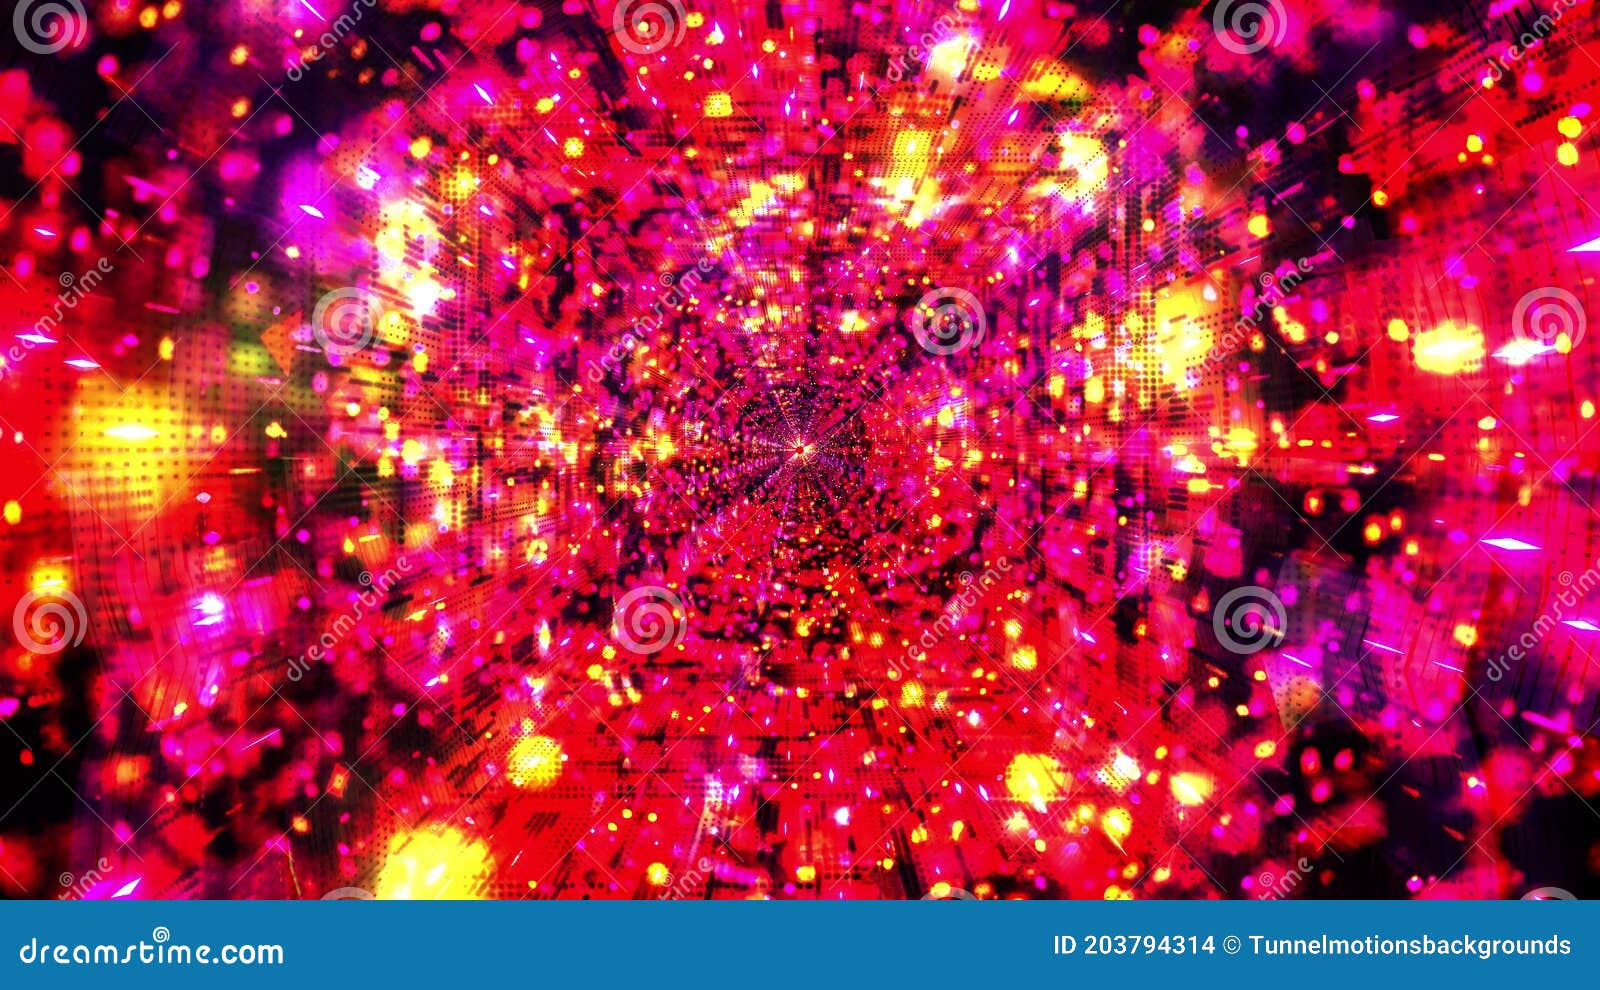 Abstract cool colorful tunnel 3d illustration vfx background wallpaper  artwork Art Print  Barewalls Posters  Prints  bwc87654560